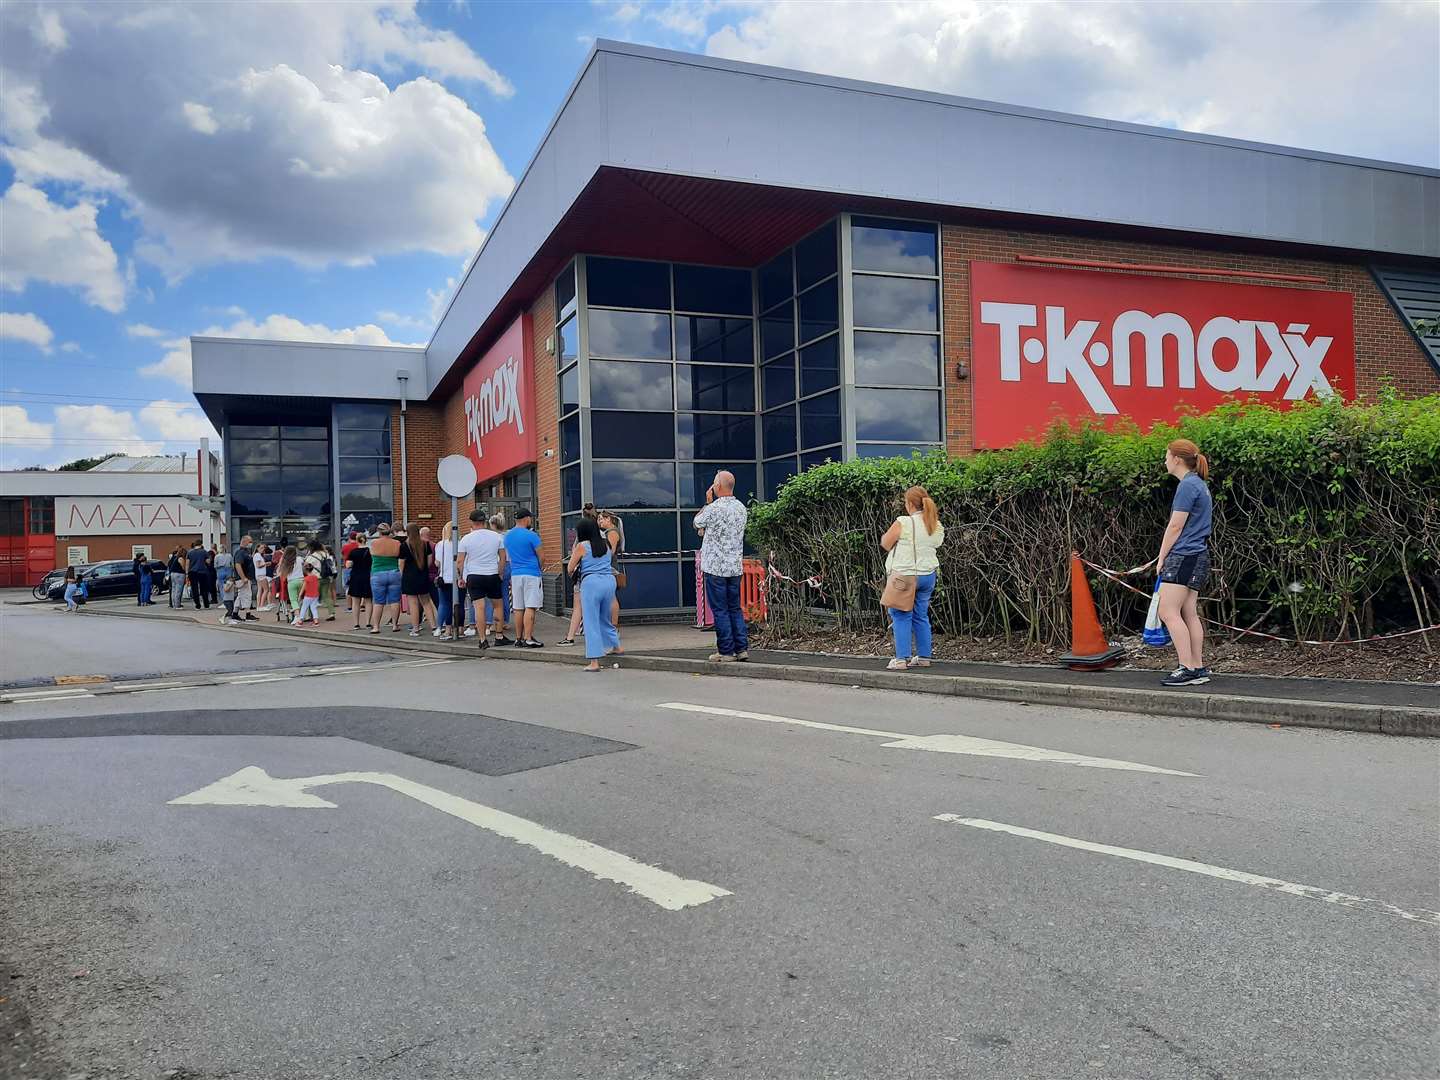 People can take their unwanted clothes and homeware to their nearest TK Maxx store